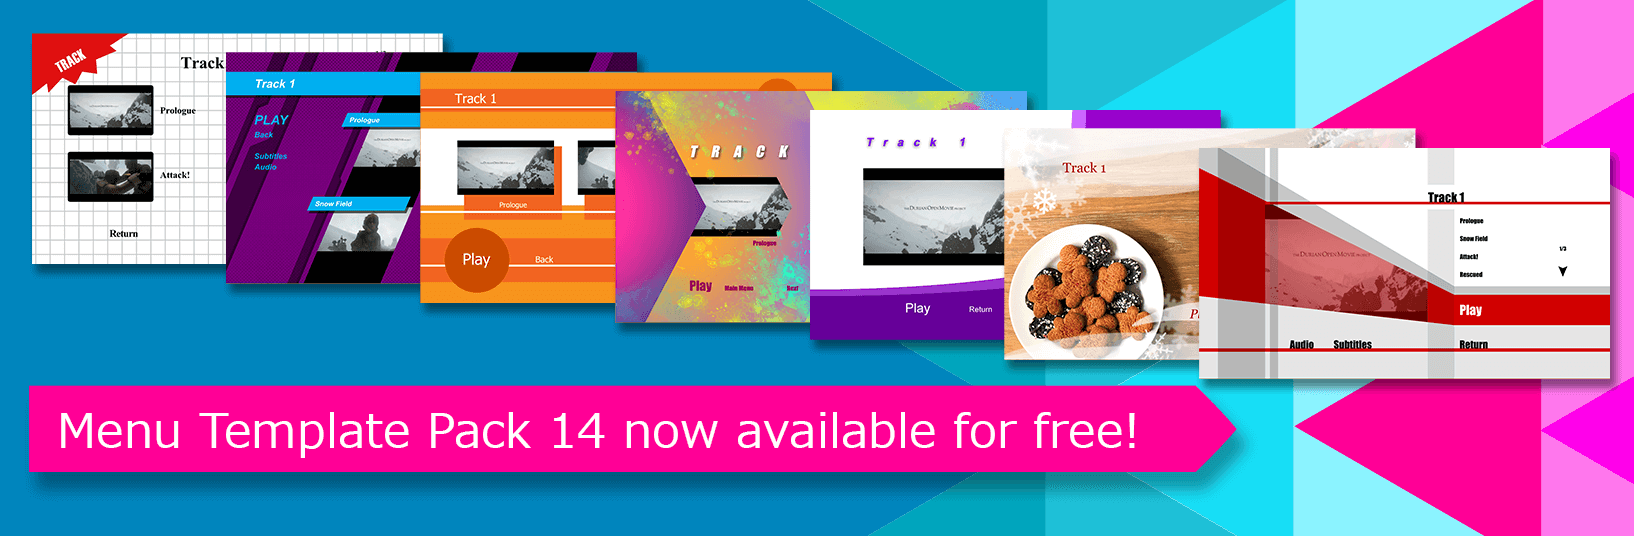 Menu Template Pack 14 now available for free!